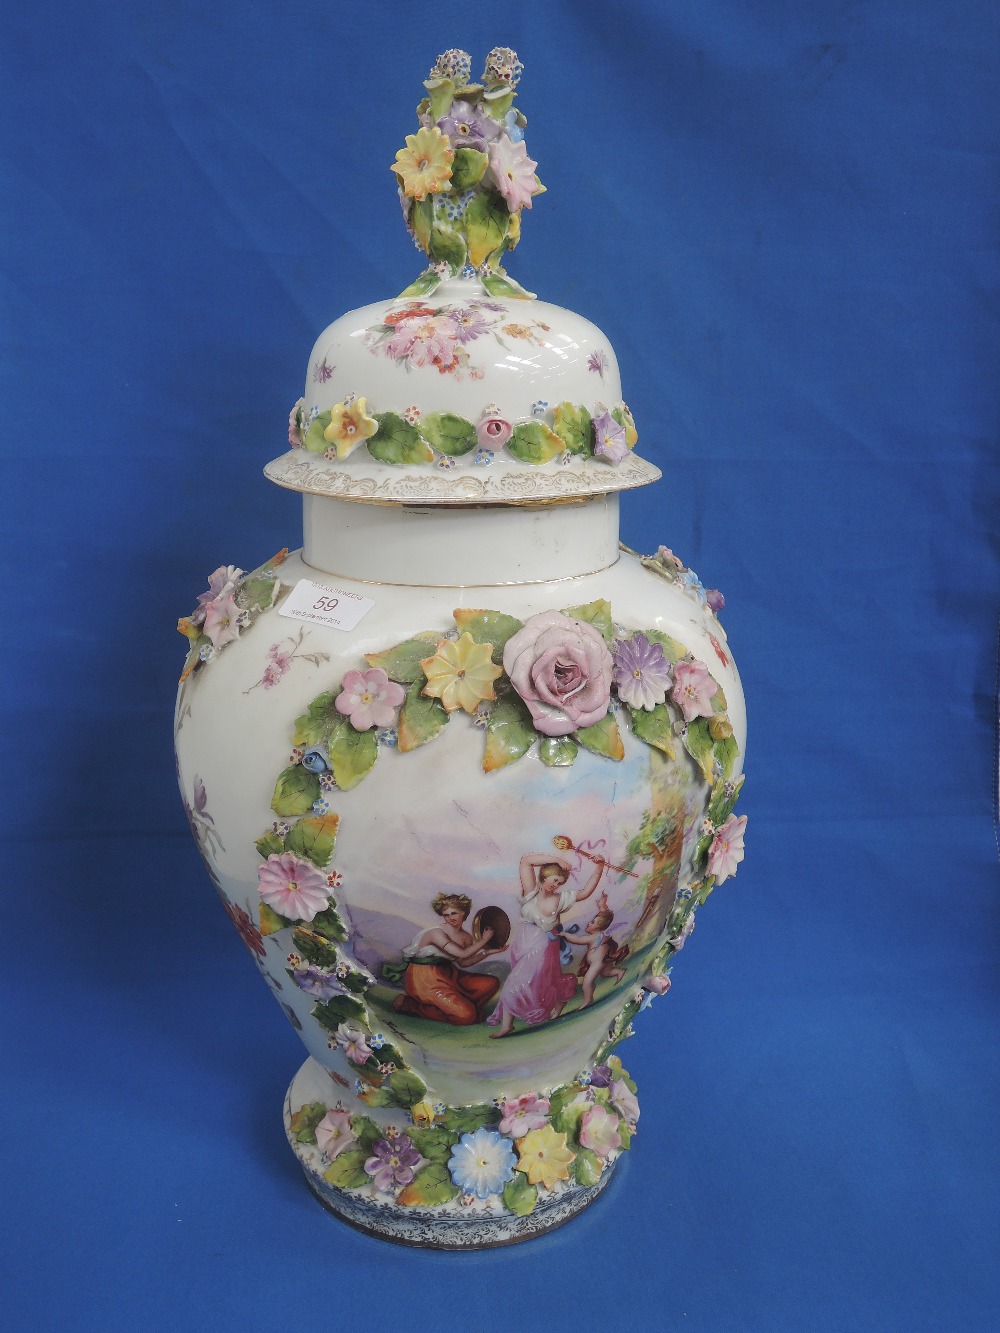 An early 20th century Continental vase and cover in the Meissen style having Kauffmann inspired